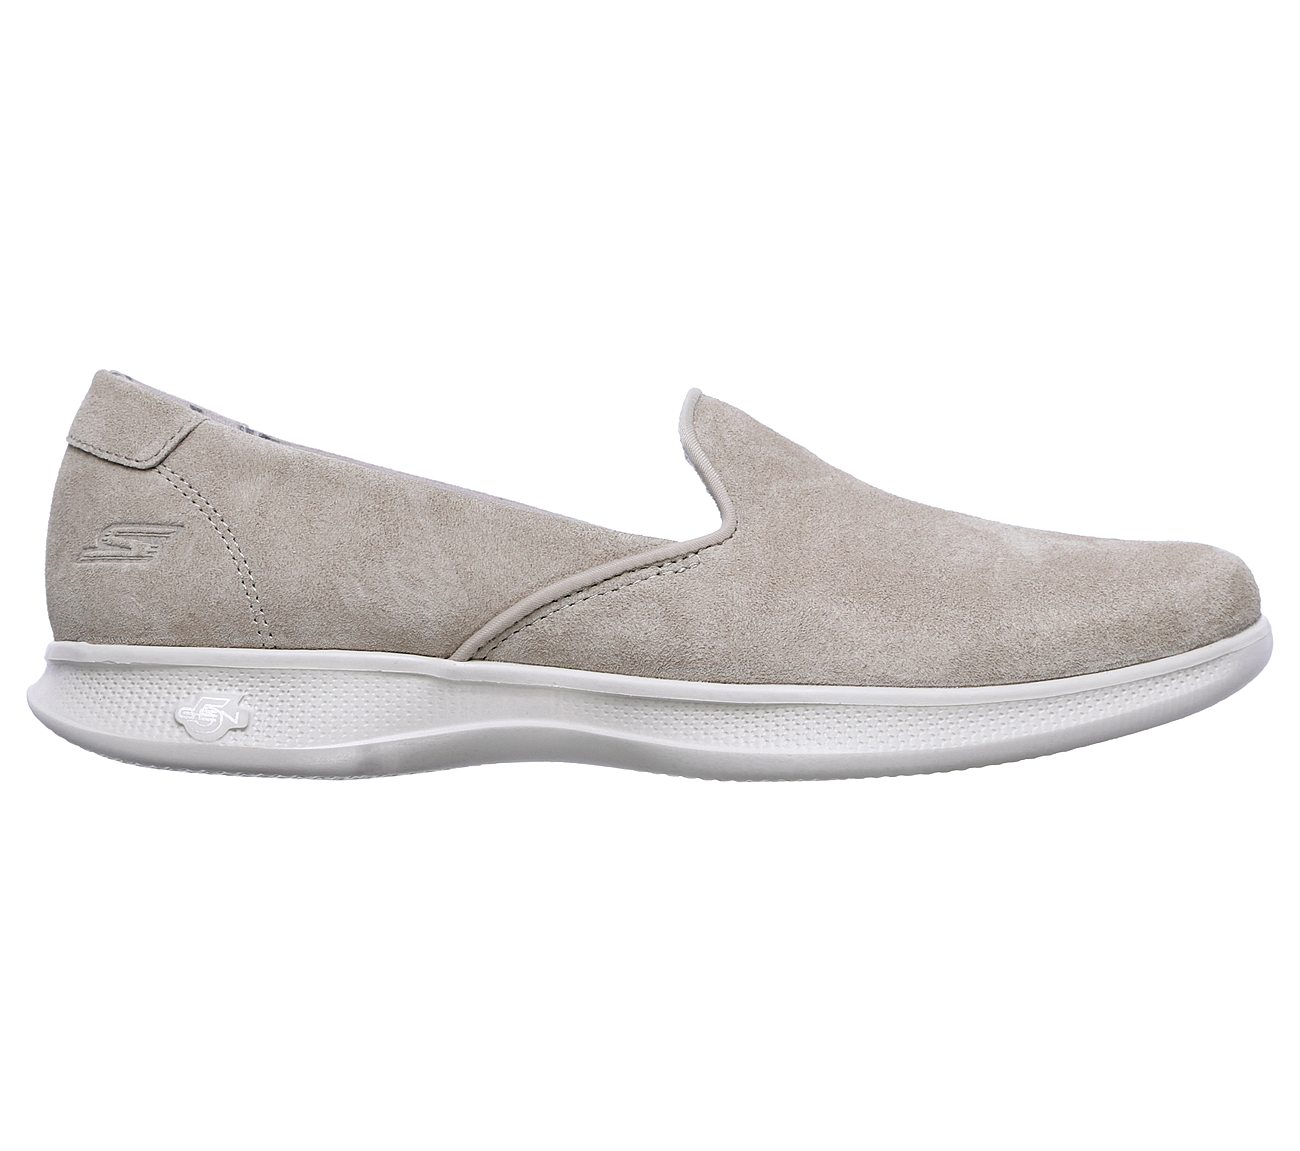 skechers go step lite taupe